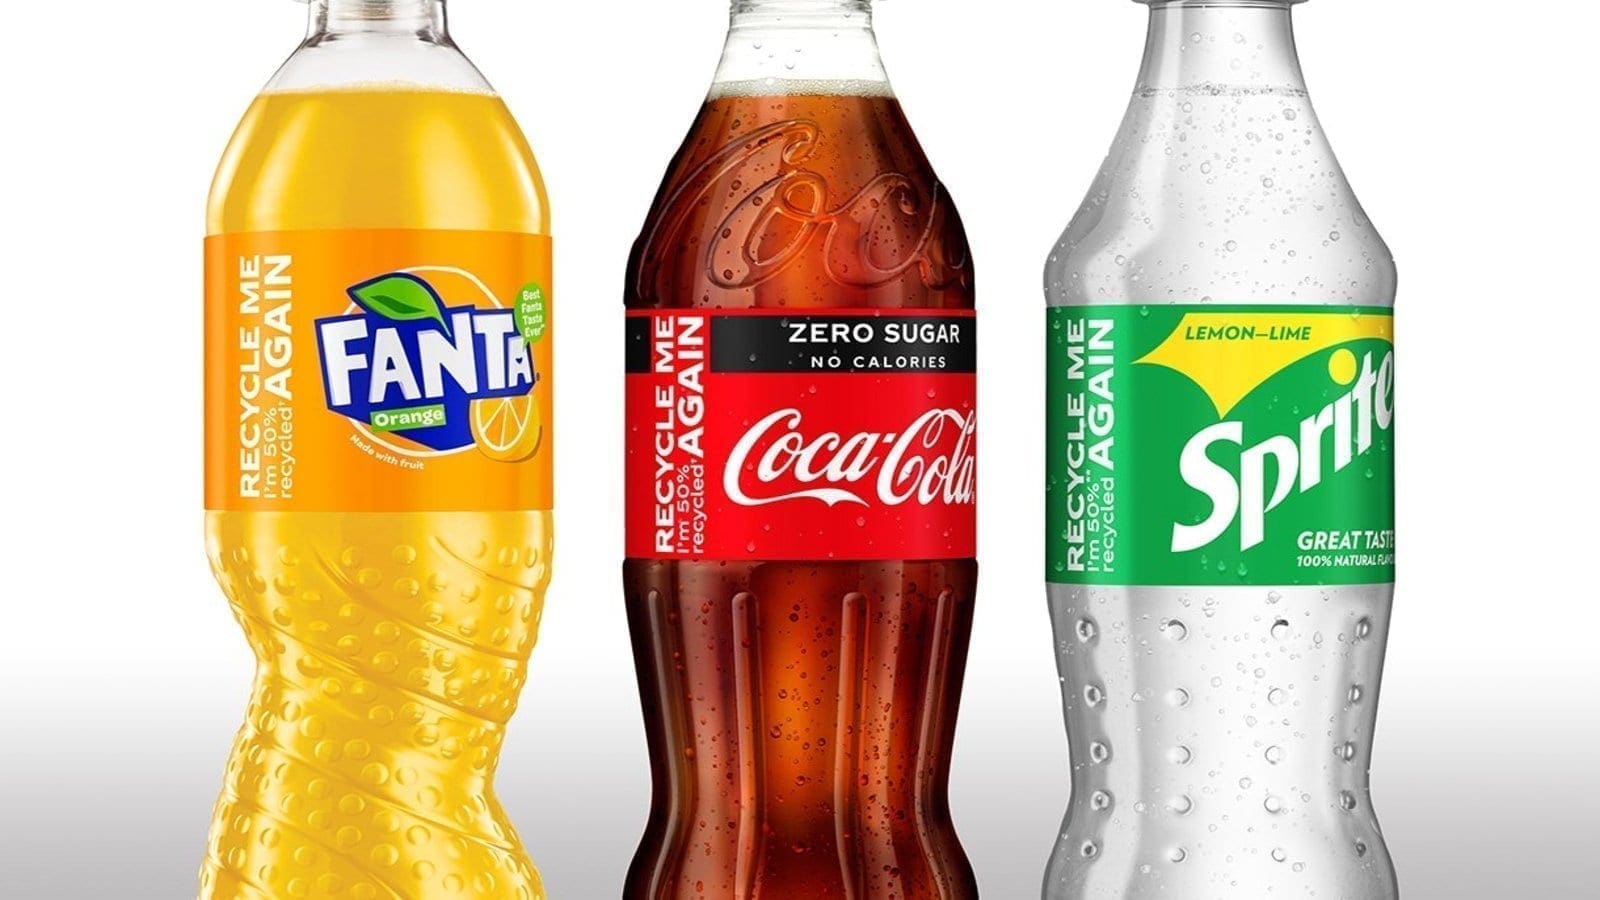 Coca-Cola Britain core brands plastic bottles are now 50% recycled plastic